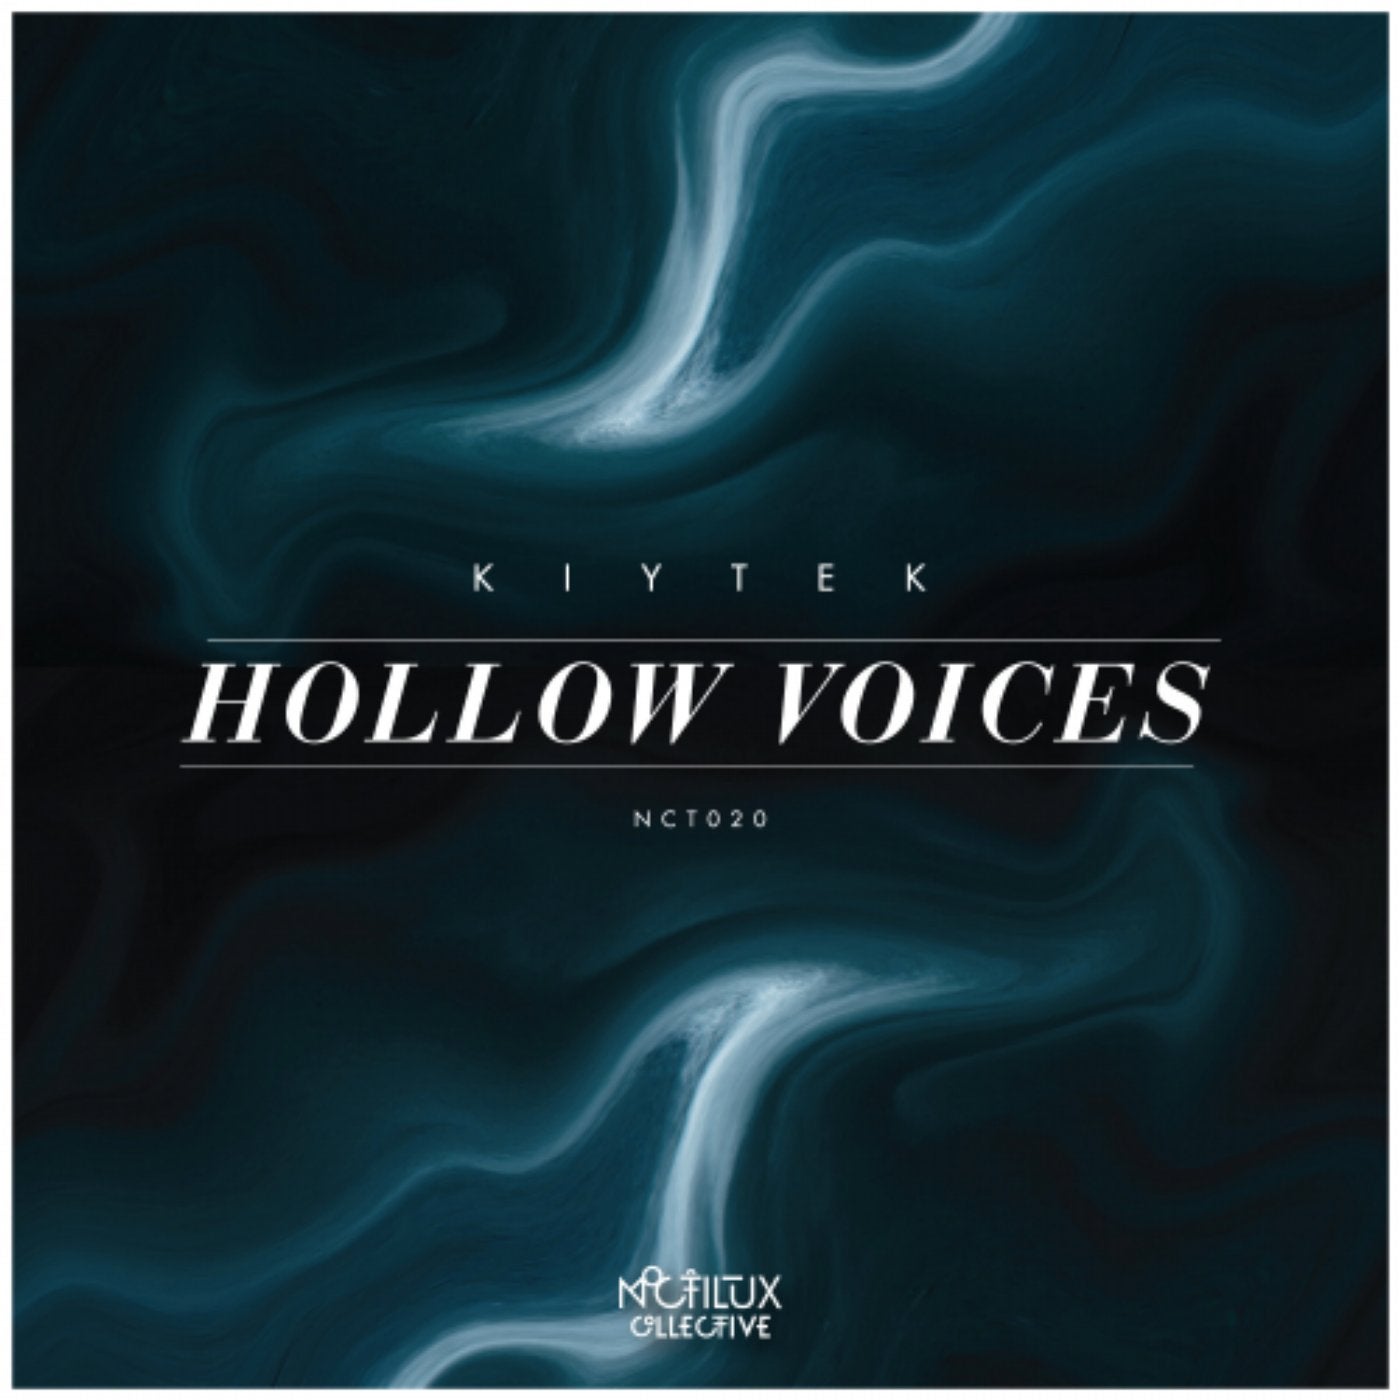 Hollow Voices EP